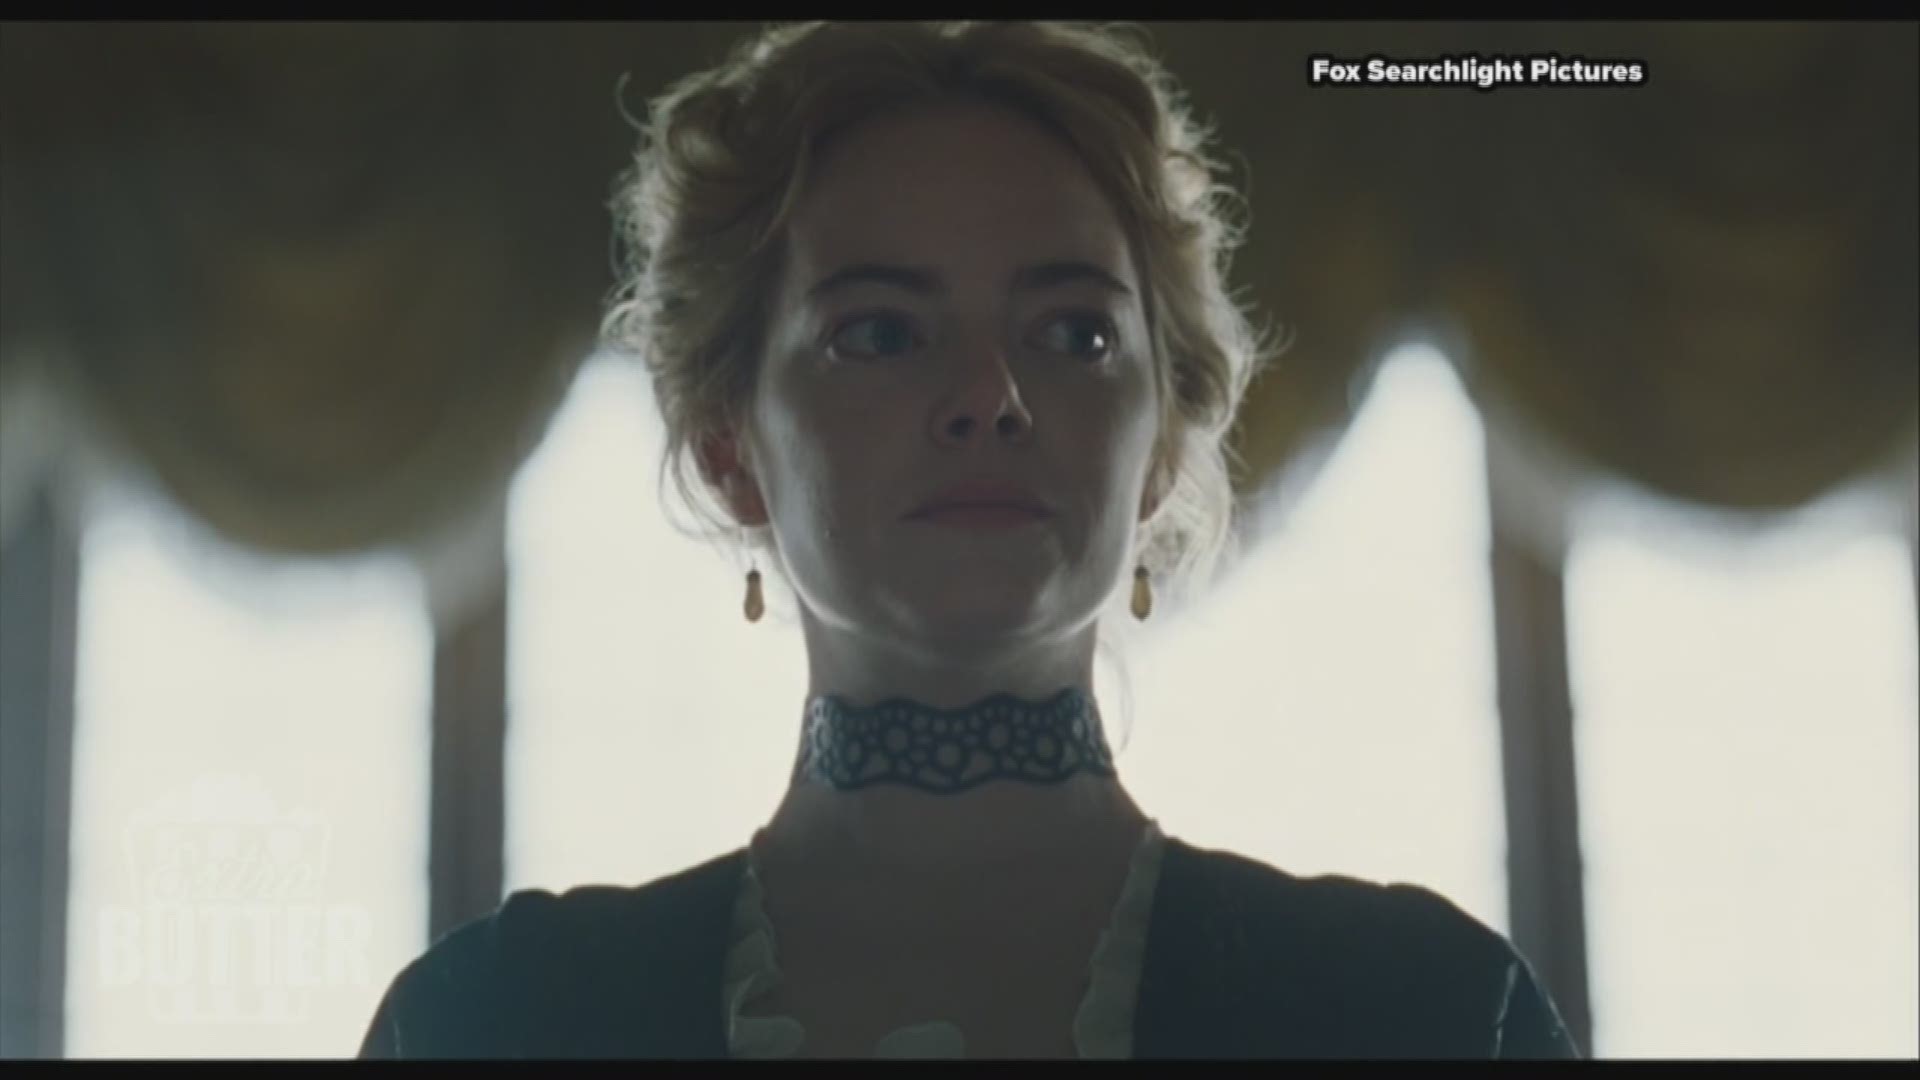 'The Favourite' is one of the most nominated movies of the year. Mark S. Allen talks with Oscar nominees Rachel Weisz and Emma Stone about working with animals and director Yorgos Lanthimos. The Extra Butter panel recommends the movie calling in an 18th century version of 'Mean Girls.' Watch Extra Butter every Friday morning at 9:30 a.m. on ABC 10. Interviews provided by Fox Searchlight Pictures.